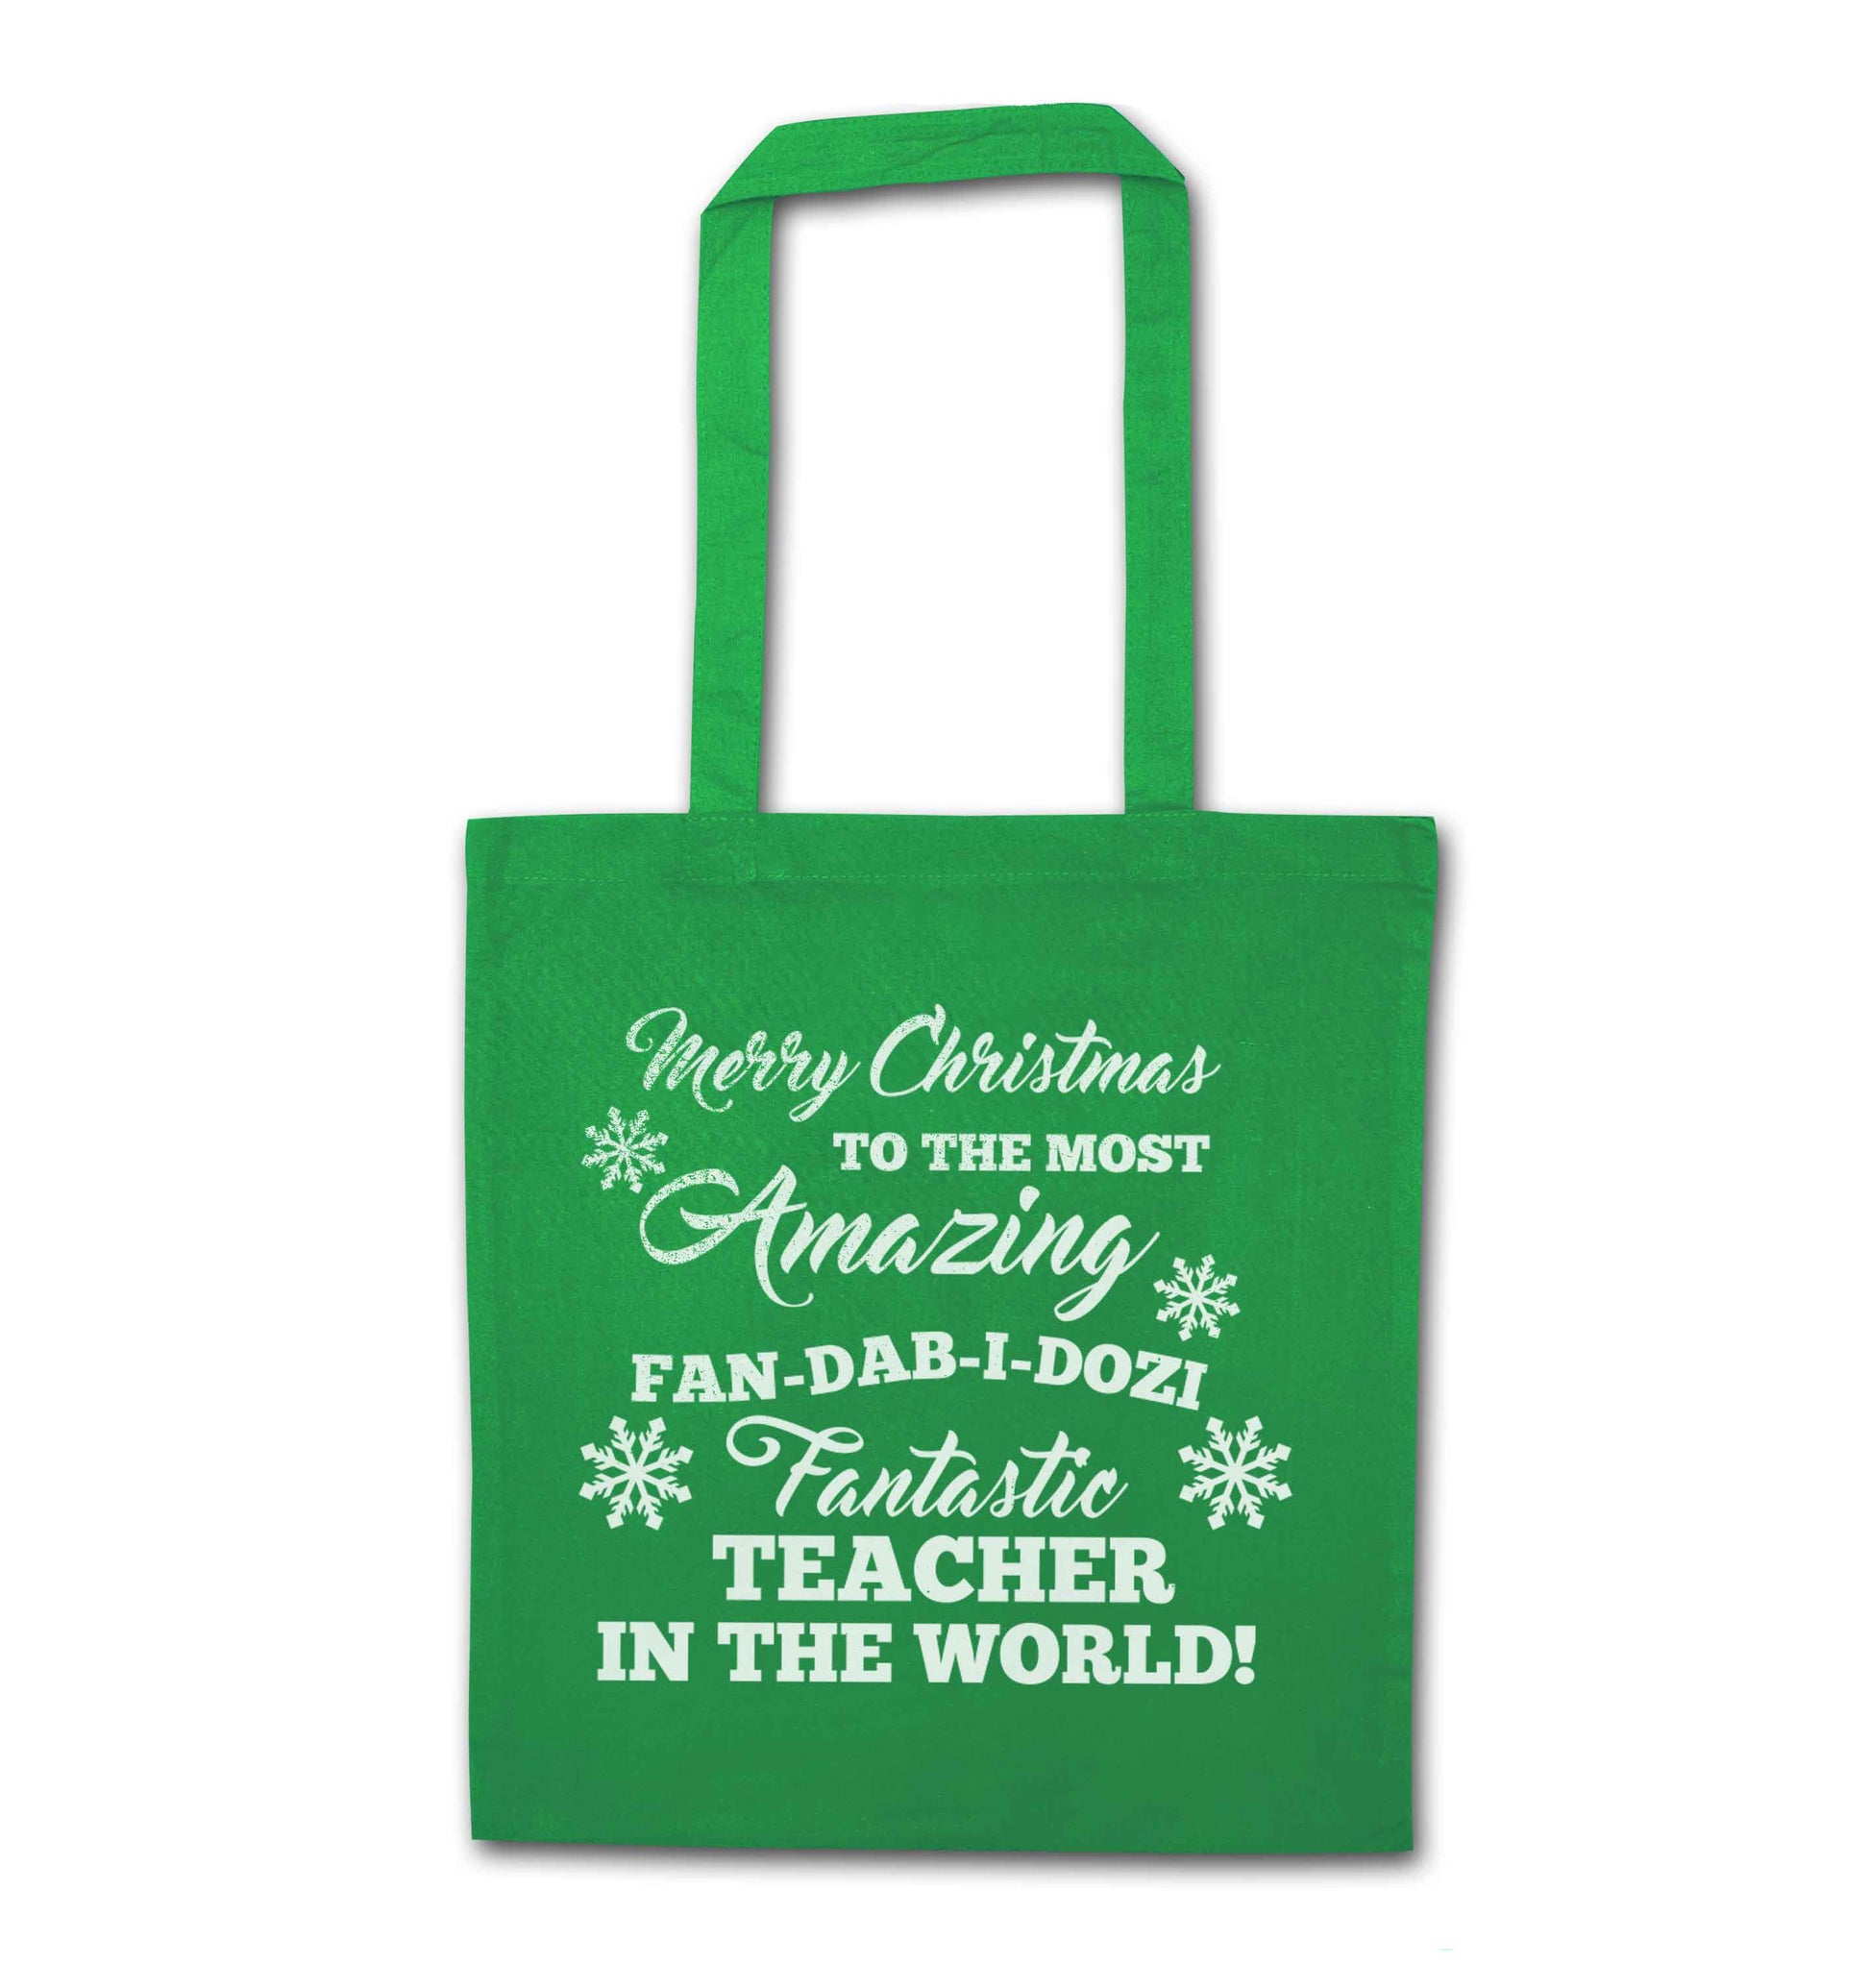 Merry Christmas to the most amazing fan-dab-i-dozi fantasic teacher in the world green tote bag